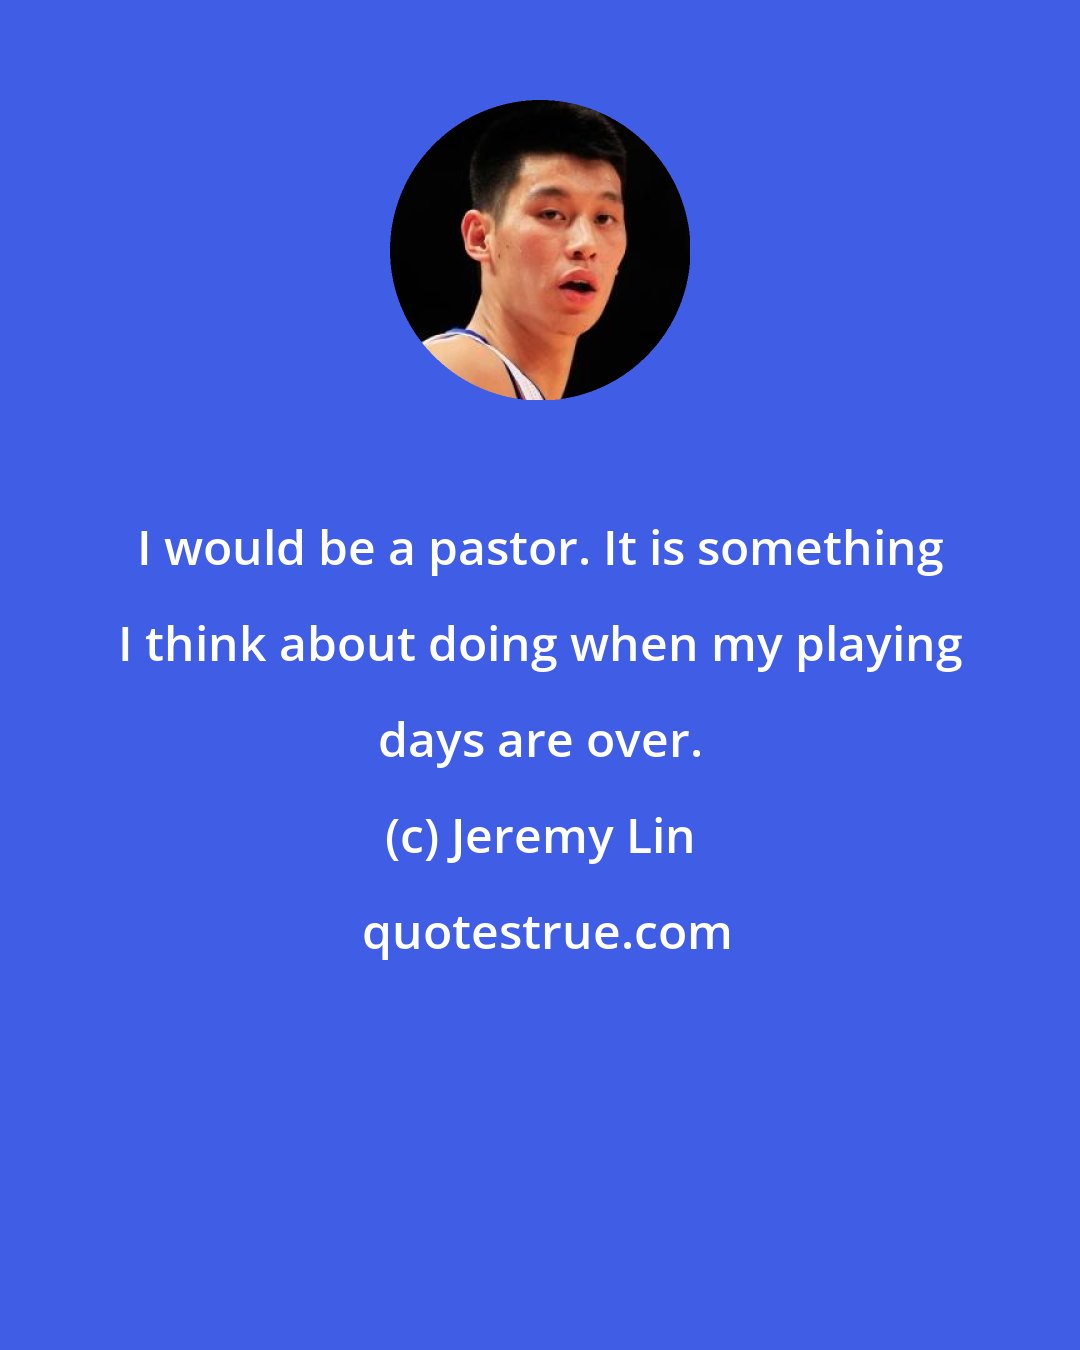 Jeremy Lin: I would be a pastor. It is something I think about doing when my playing days are over.